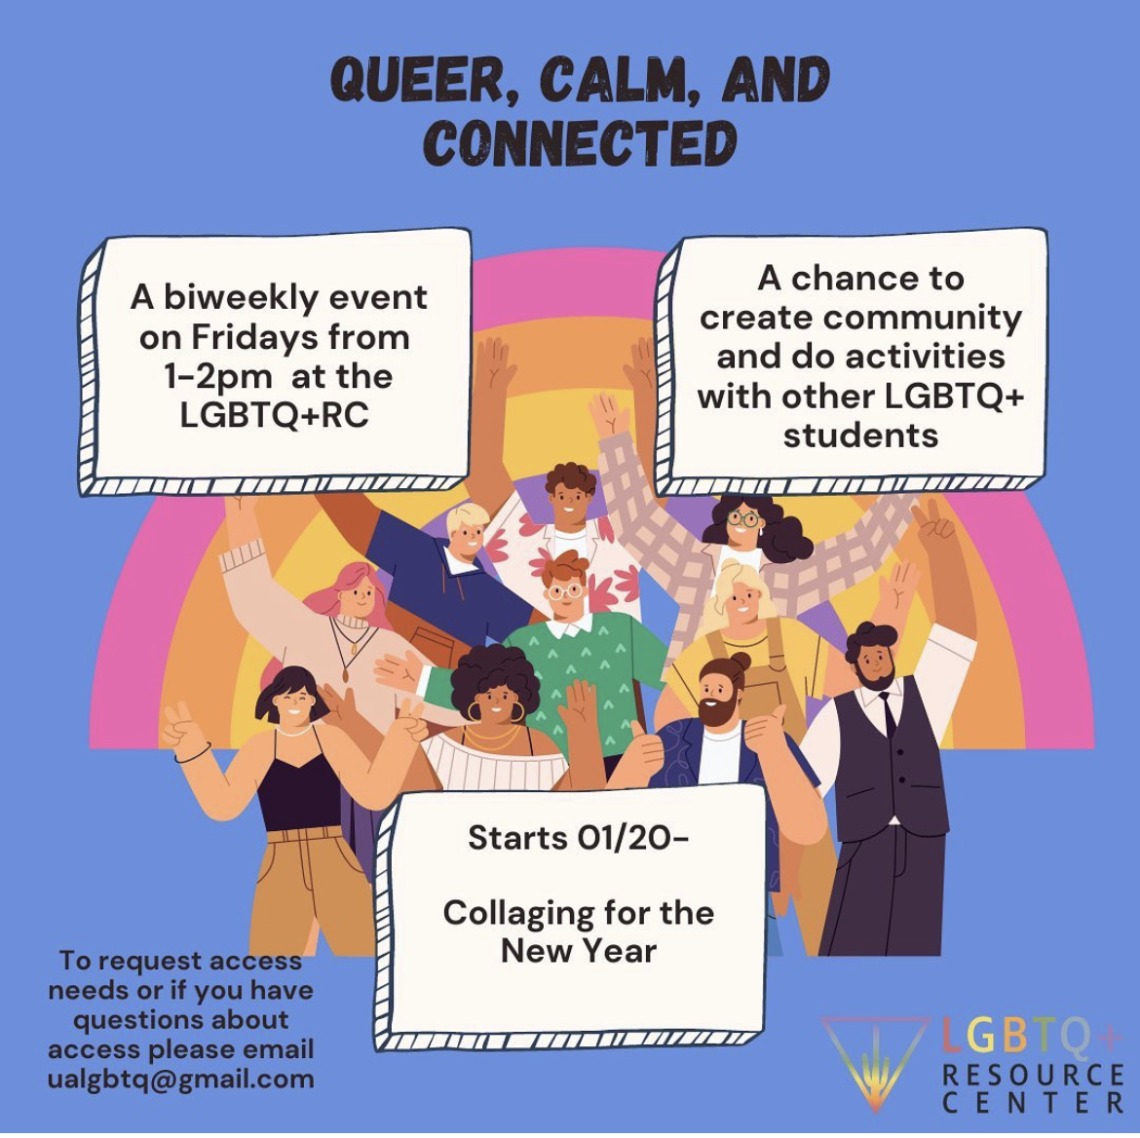 Queer, Calm, and Connected. A biweekly event on fridays from 1-2pm at the LGBTQ+RC